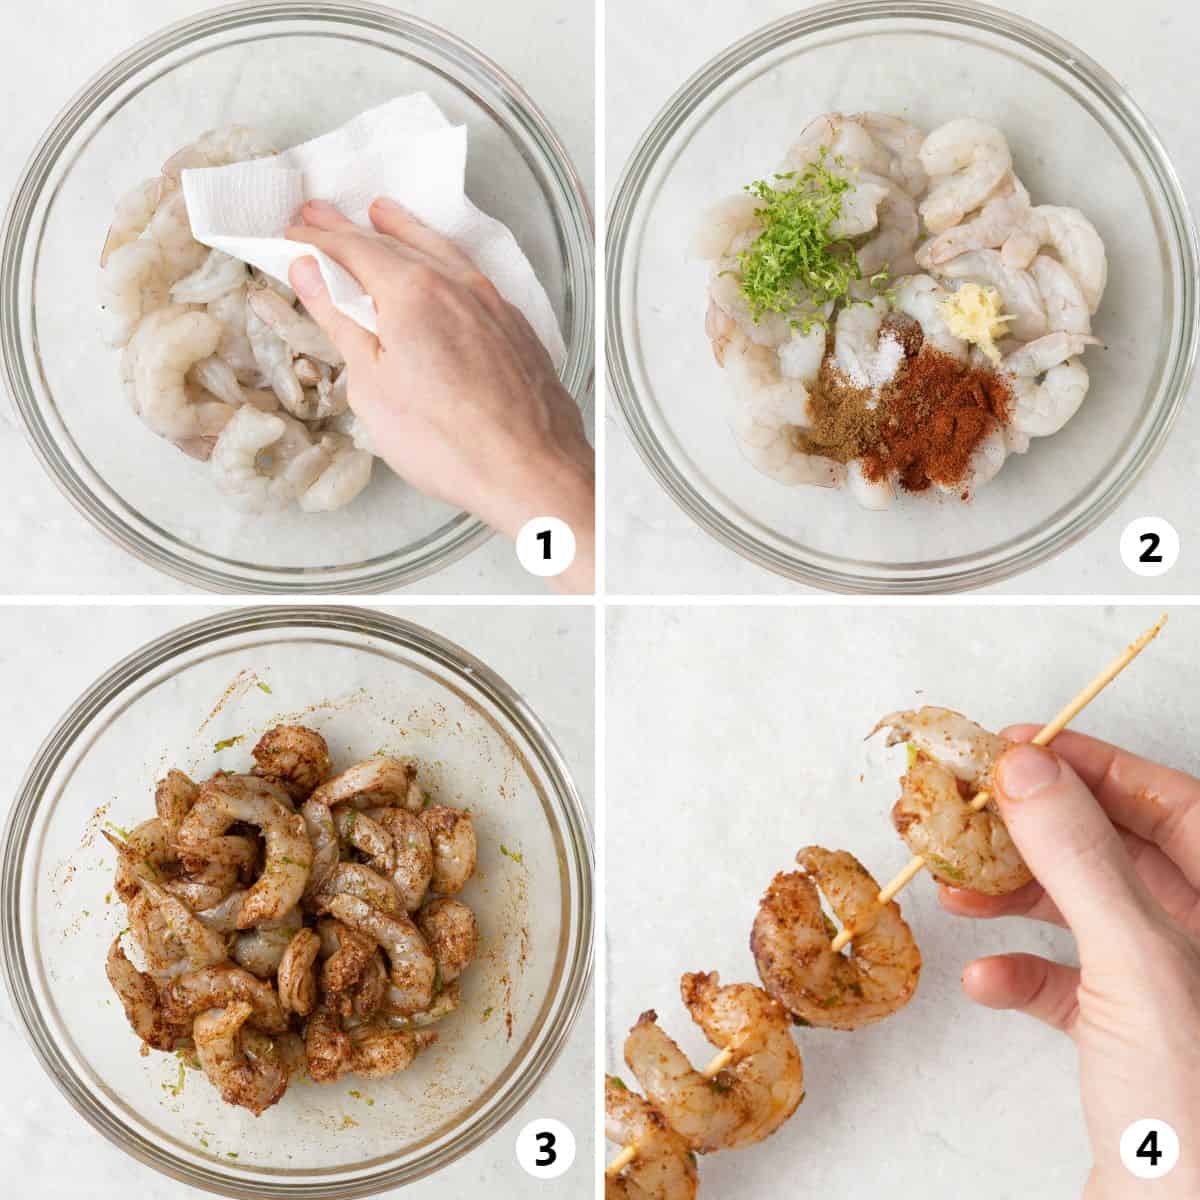 4 image collage preparing shrimp: 1- patting dry in a bowl, 2- adding seasoning on top, 3- after coating in seasoning, 4- placing a shrimp on a wooden skewer with more already on it.